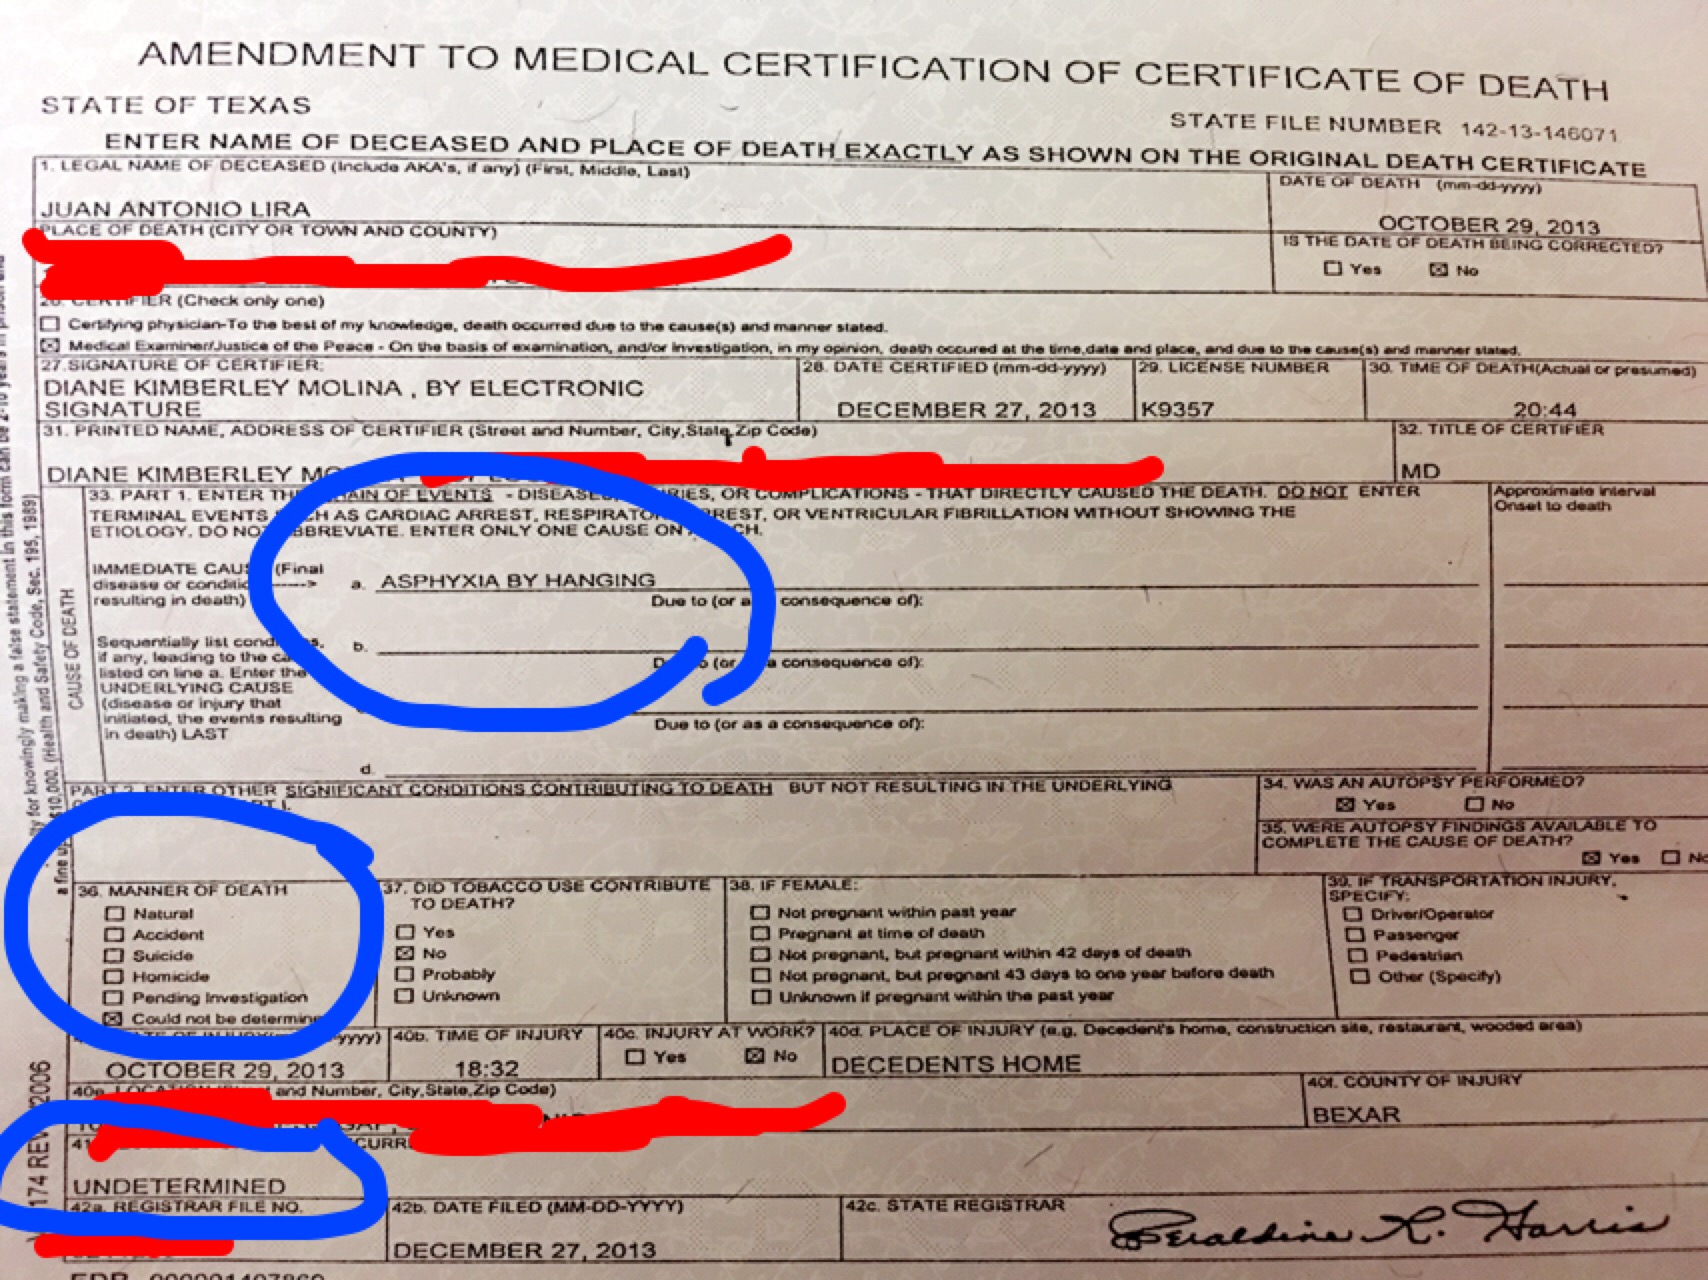 Certificate of Death with information on the cause of death.